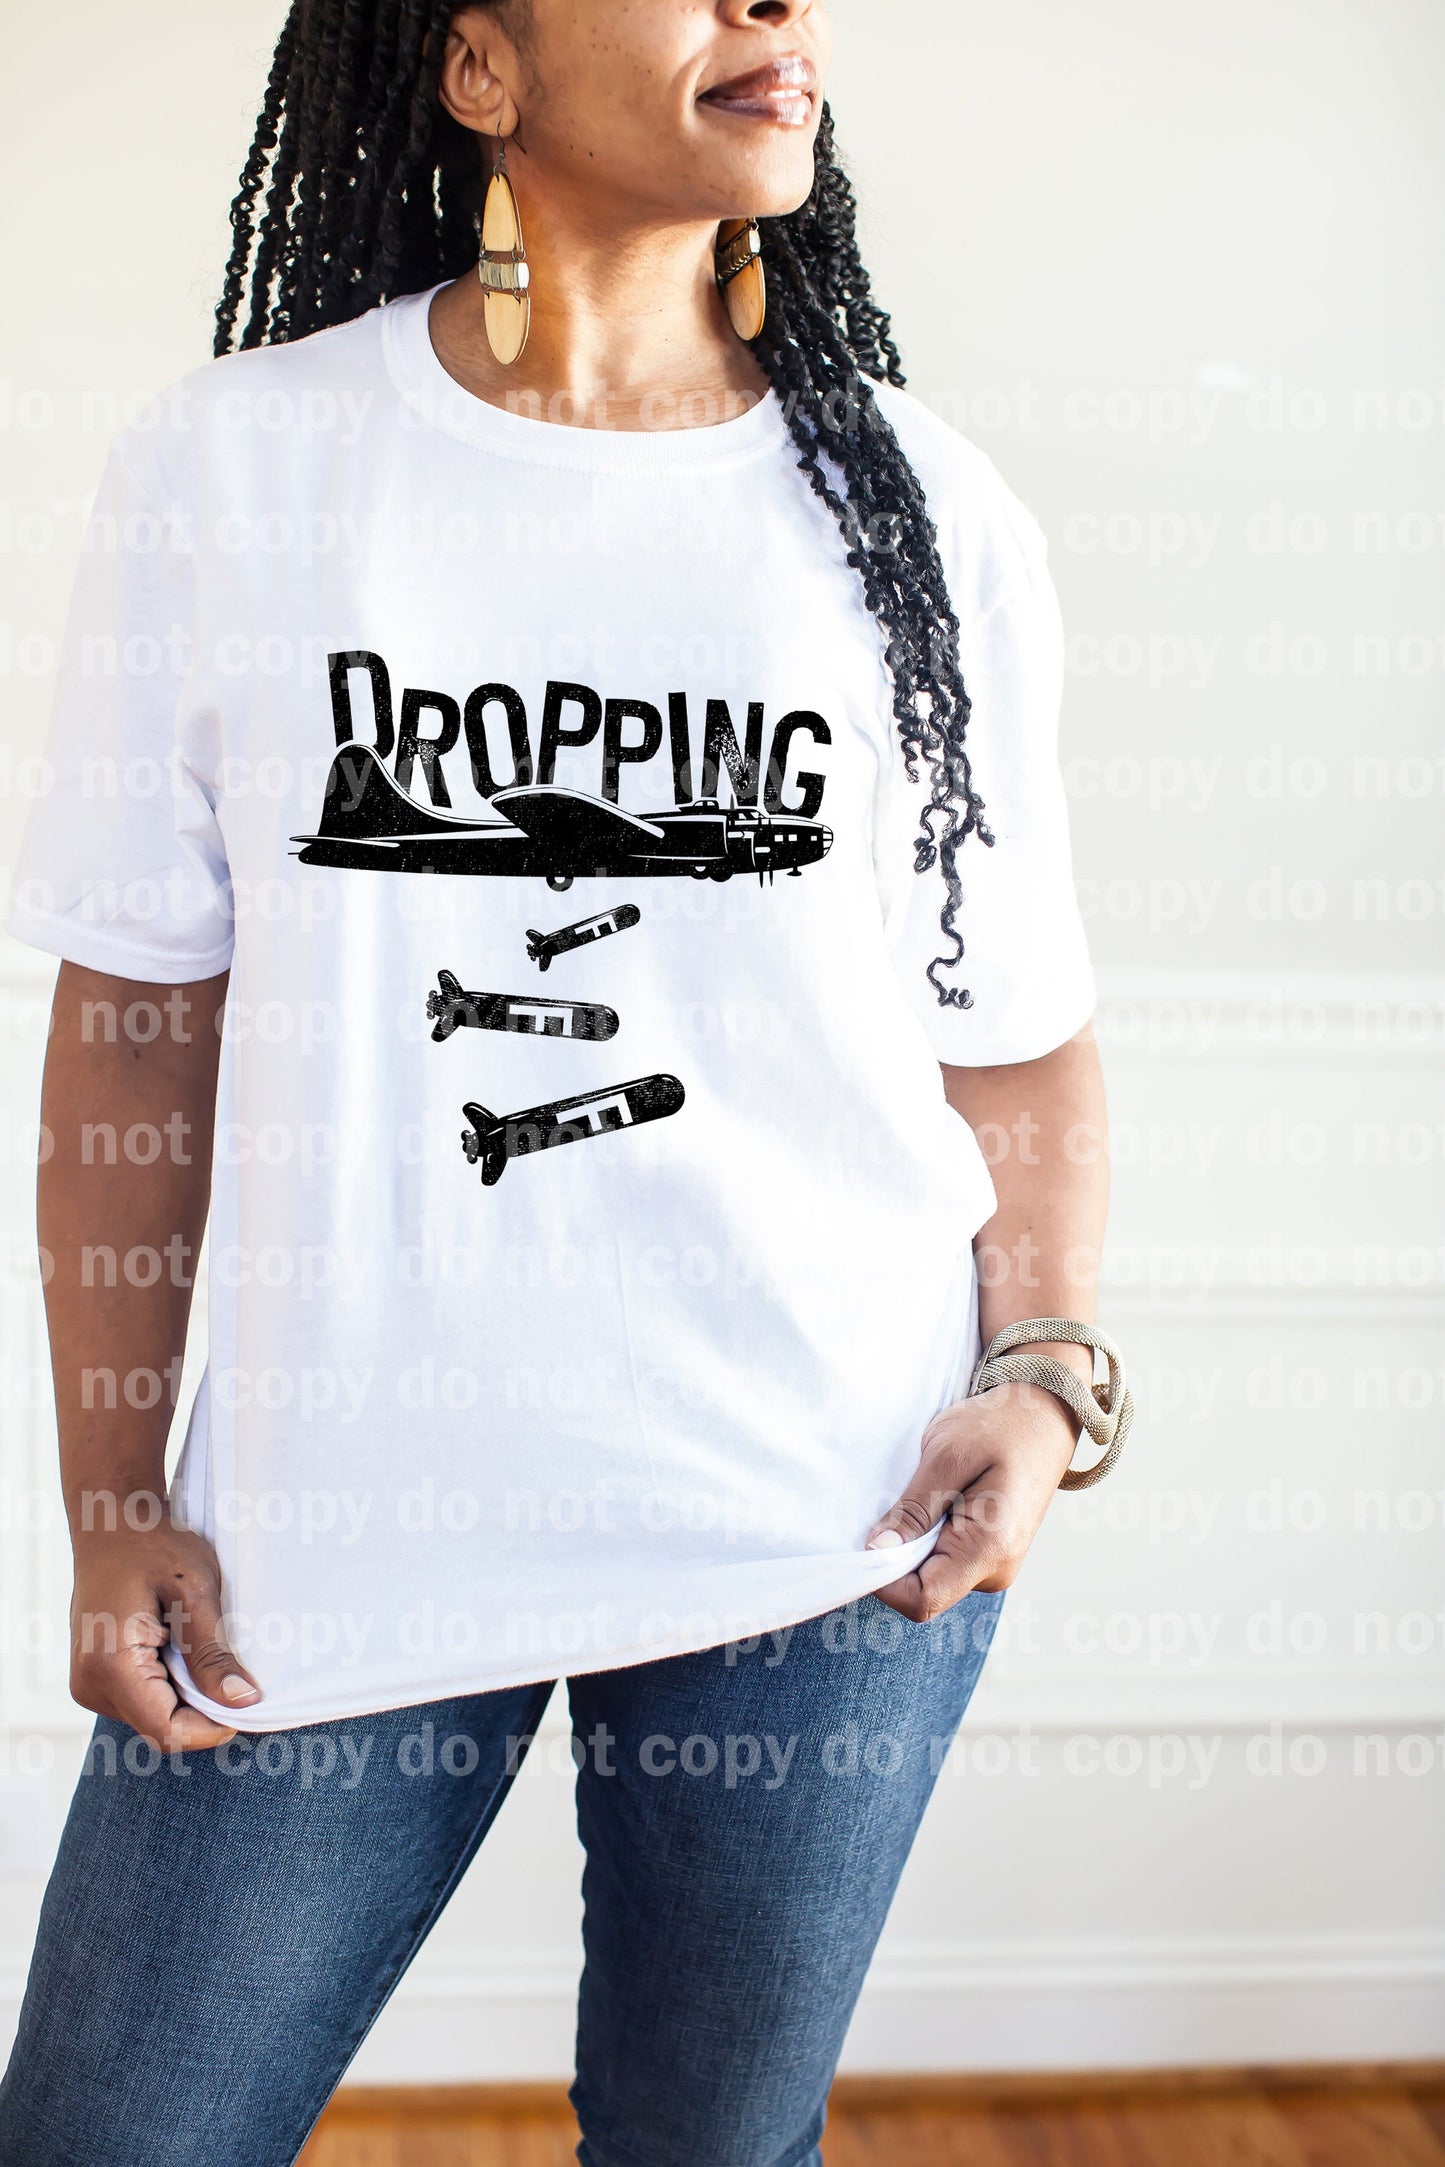 Dropping Dream Print or Sublimation Print